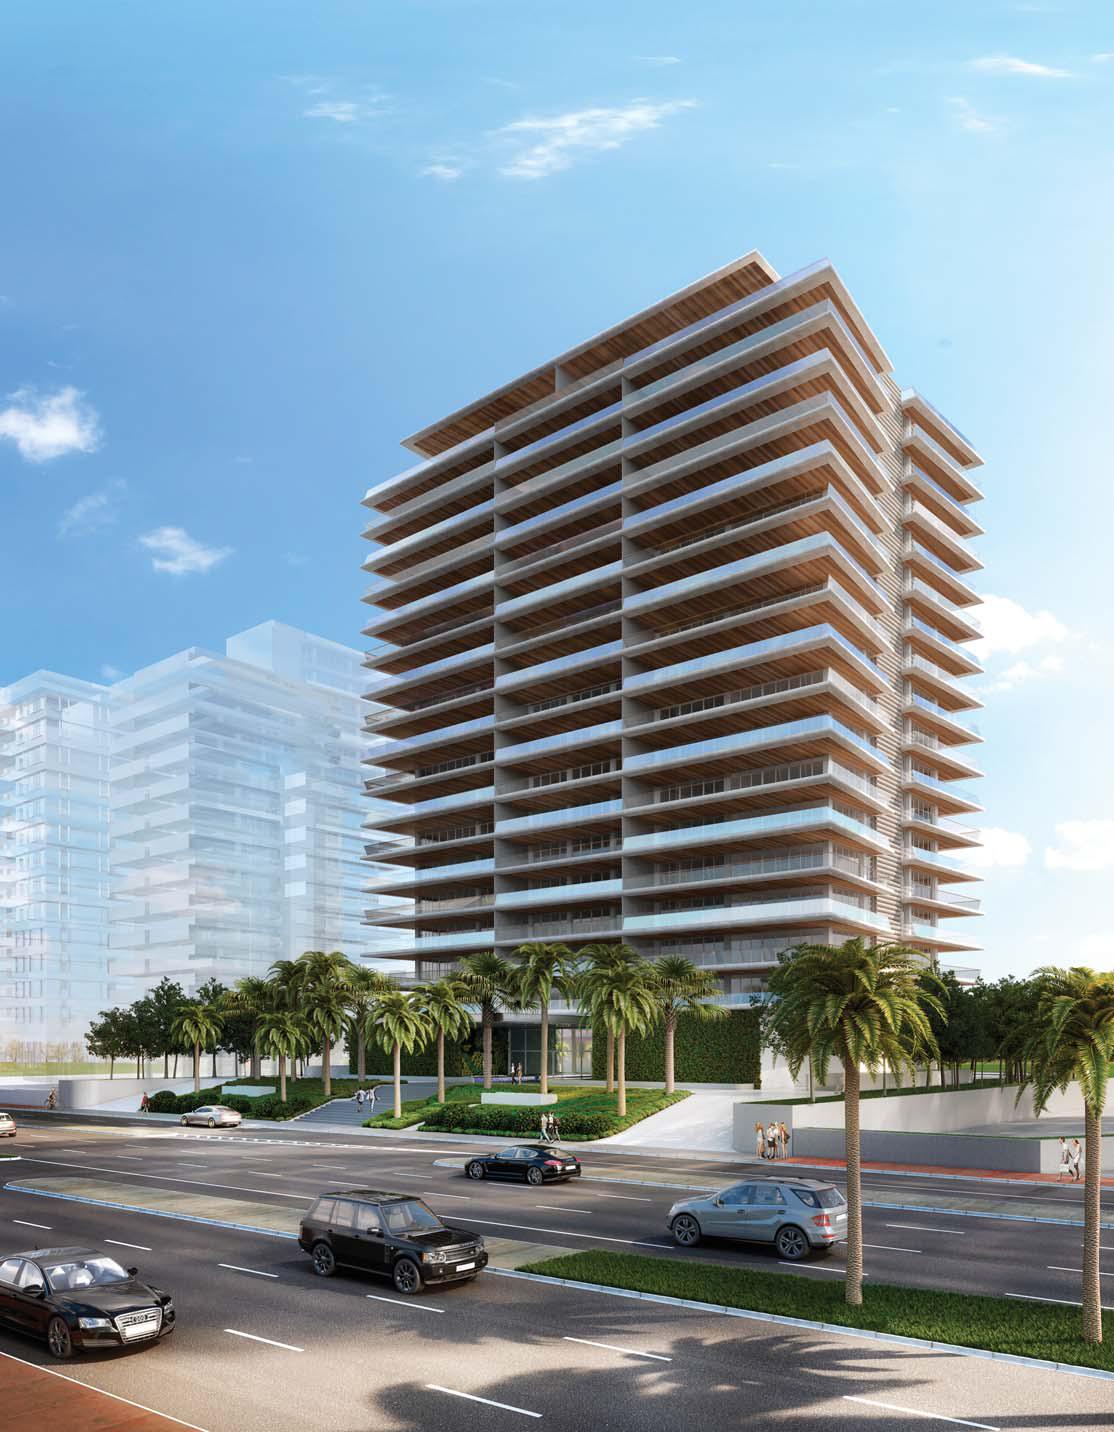 Founder of Multiplan wins approval to build Miami Beach condo